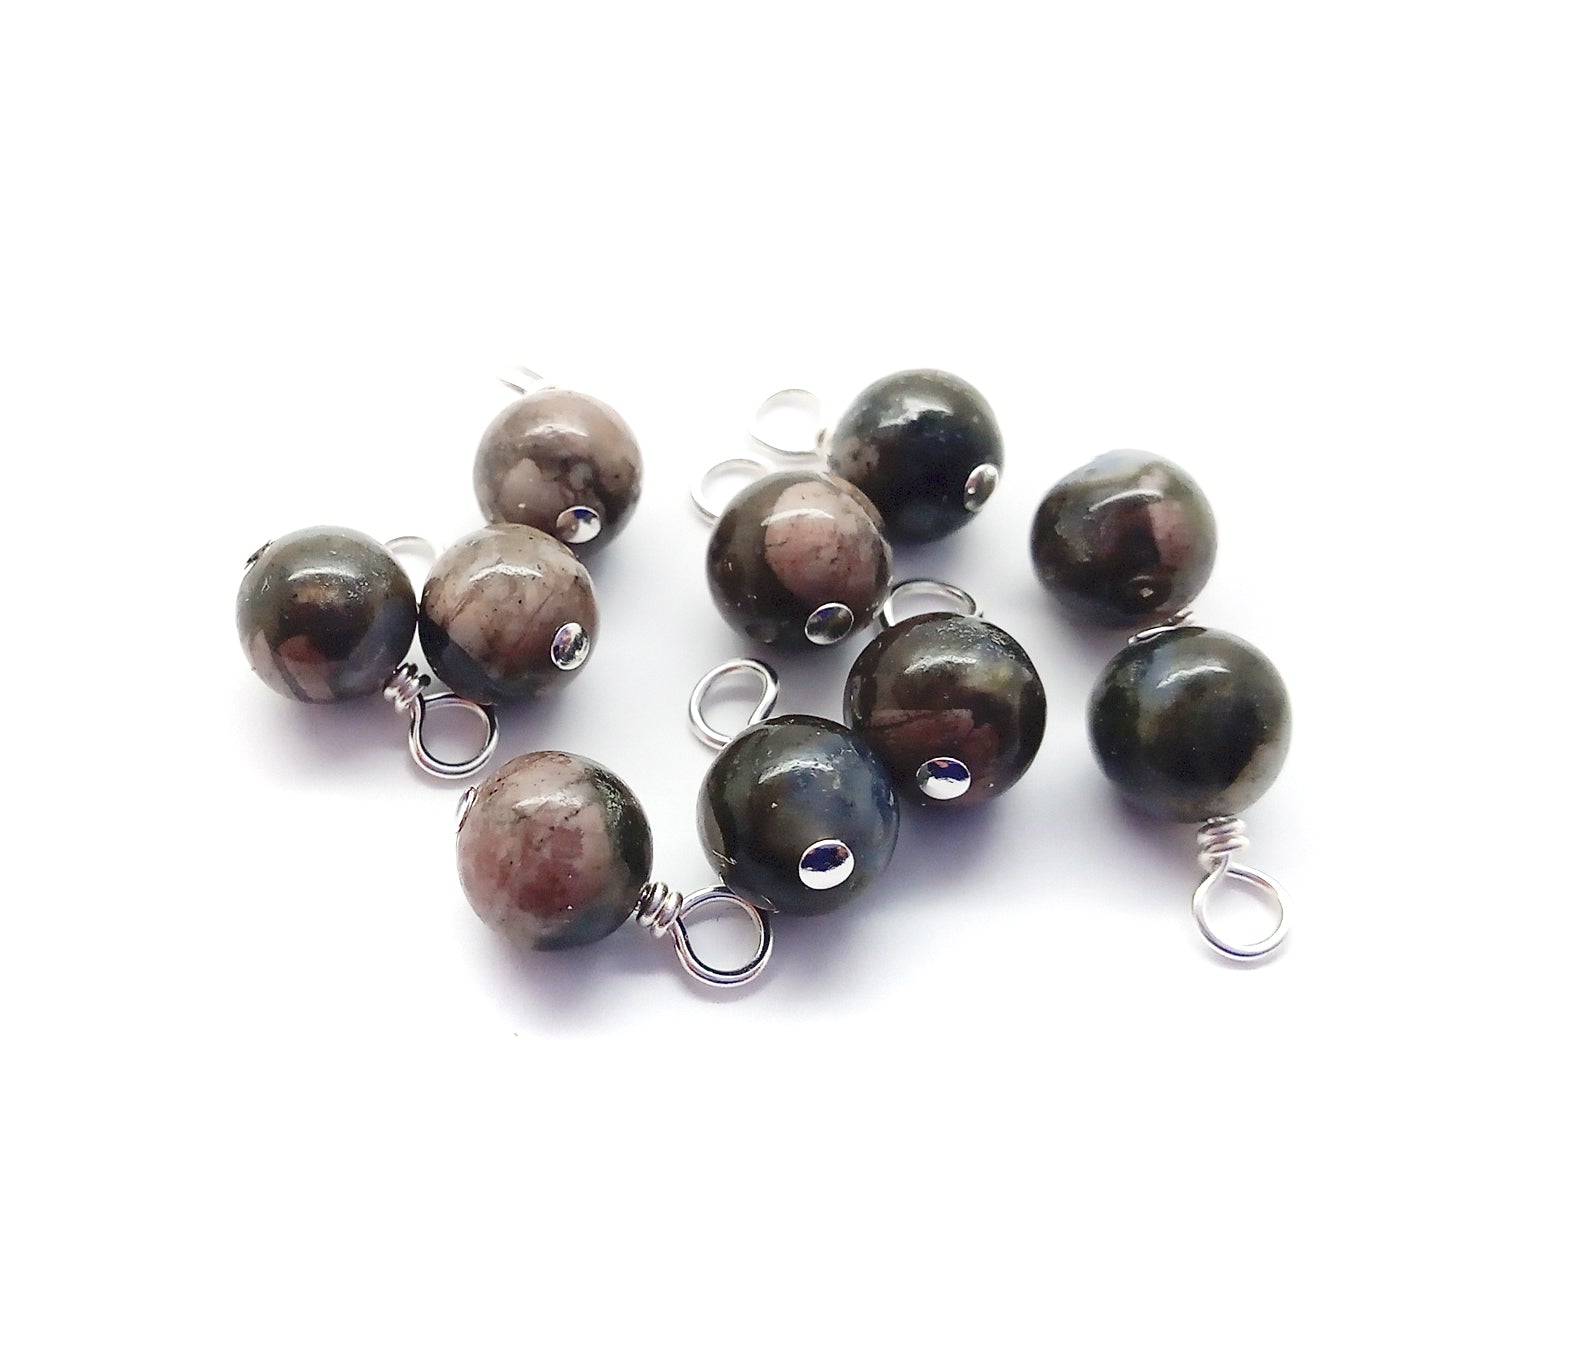 Glaucophane 6mm Bead Charms, 5 to 10 pieces, Gemstone Dangles